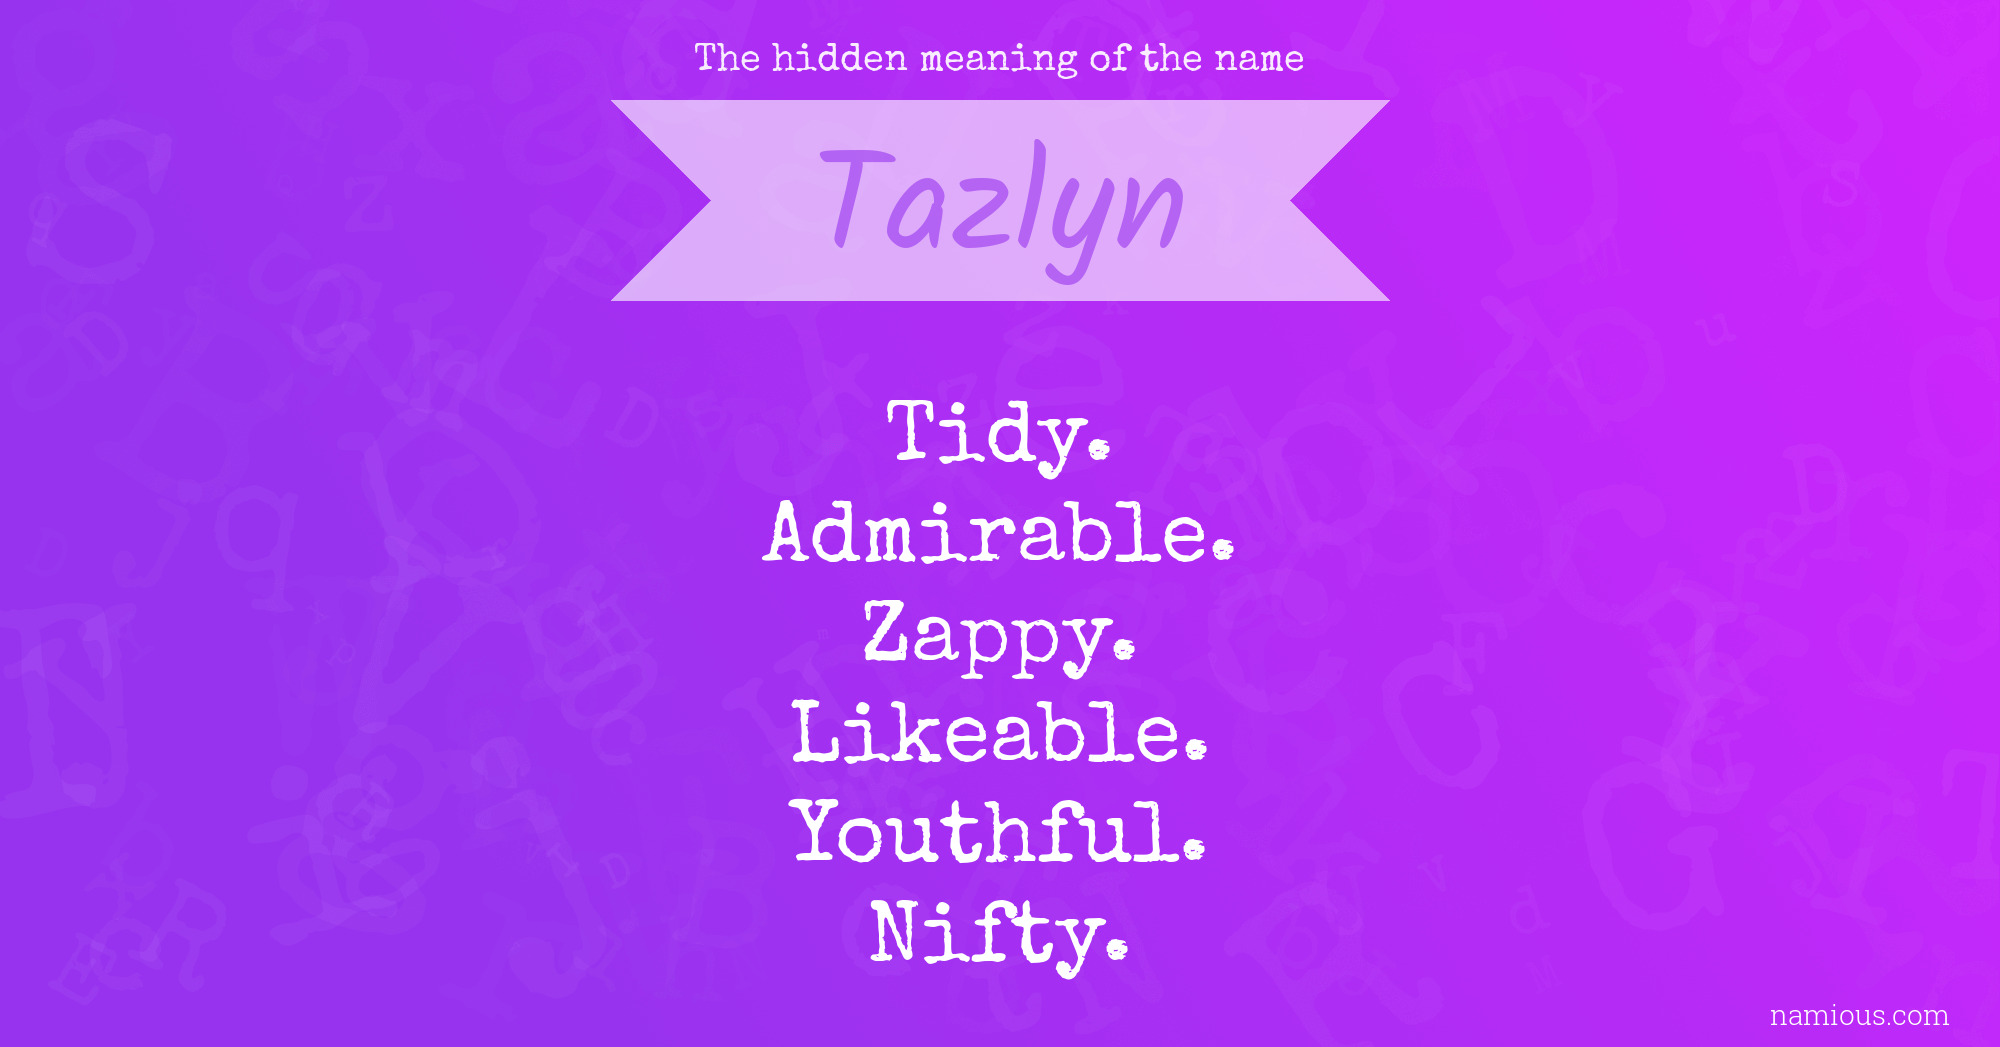 The hidden meaning of the name Tazlyn